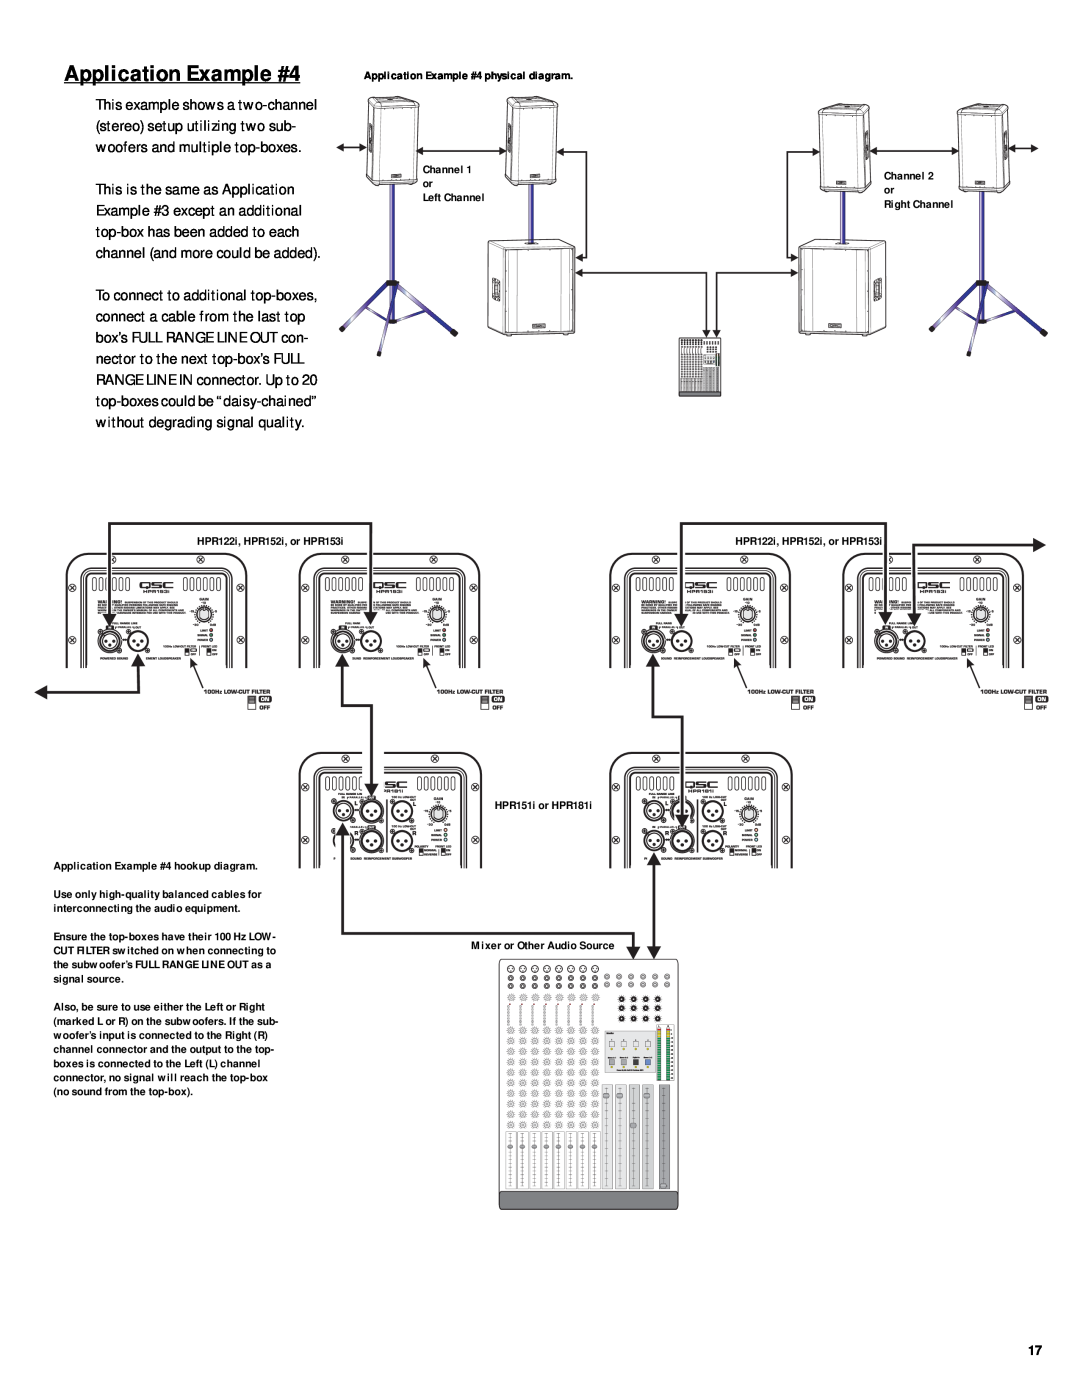 QSC Audio HPR122i, HPR152i, HPR153i, HPR151i, HPR181i user manual Application Example #4 physical diagram 